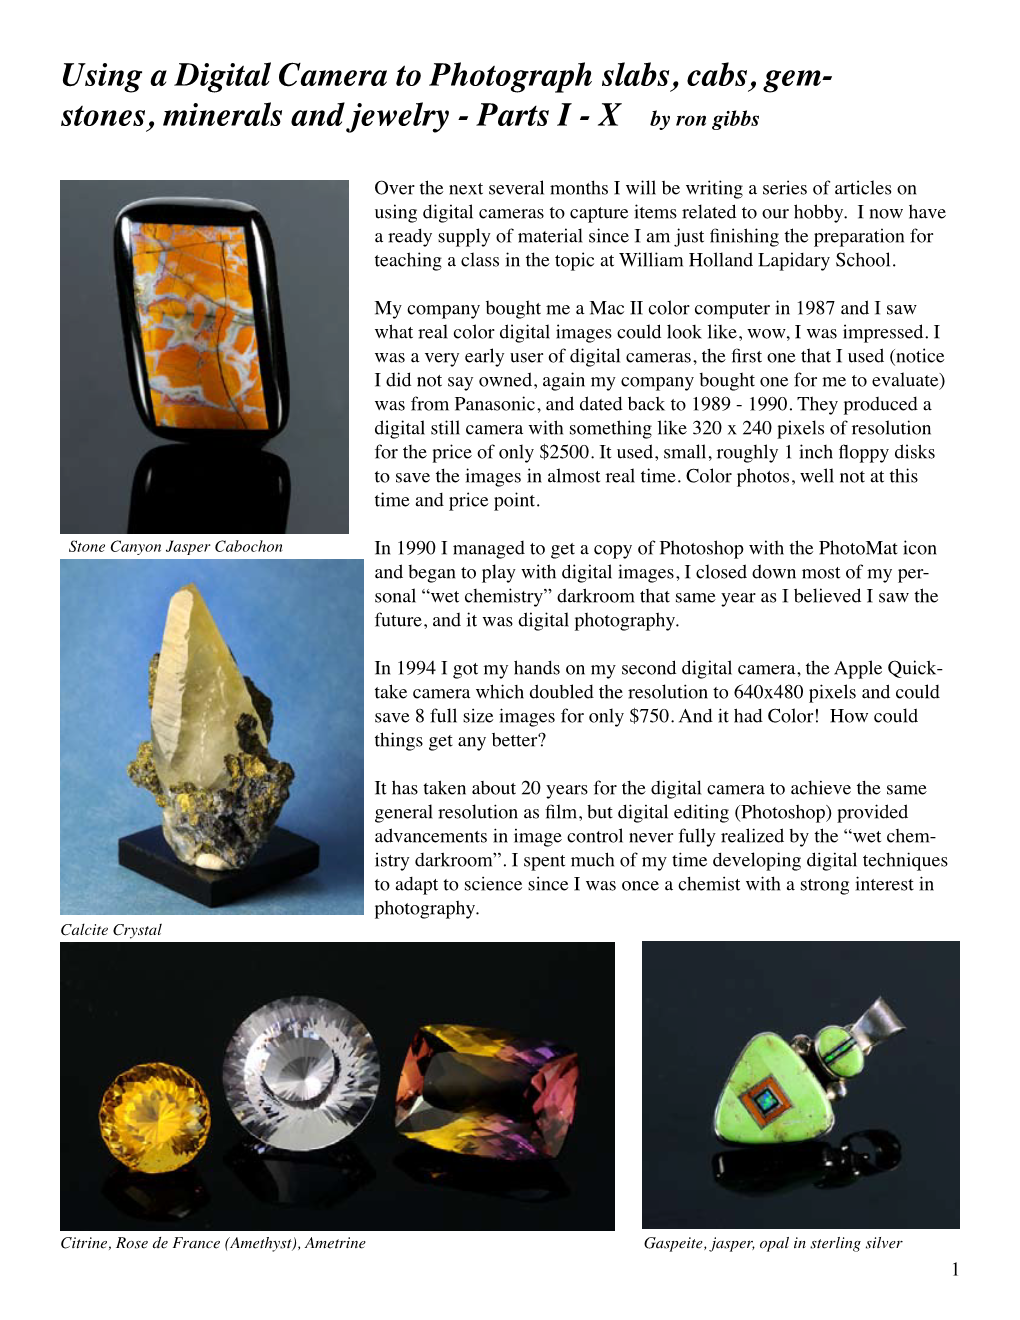 Using a Digital Camera to Photograph Slabs, Cabs, Gem- Stones, Minerals and Jewelry - Parts I - X by Ron Gibbs